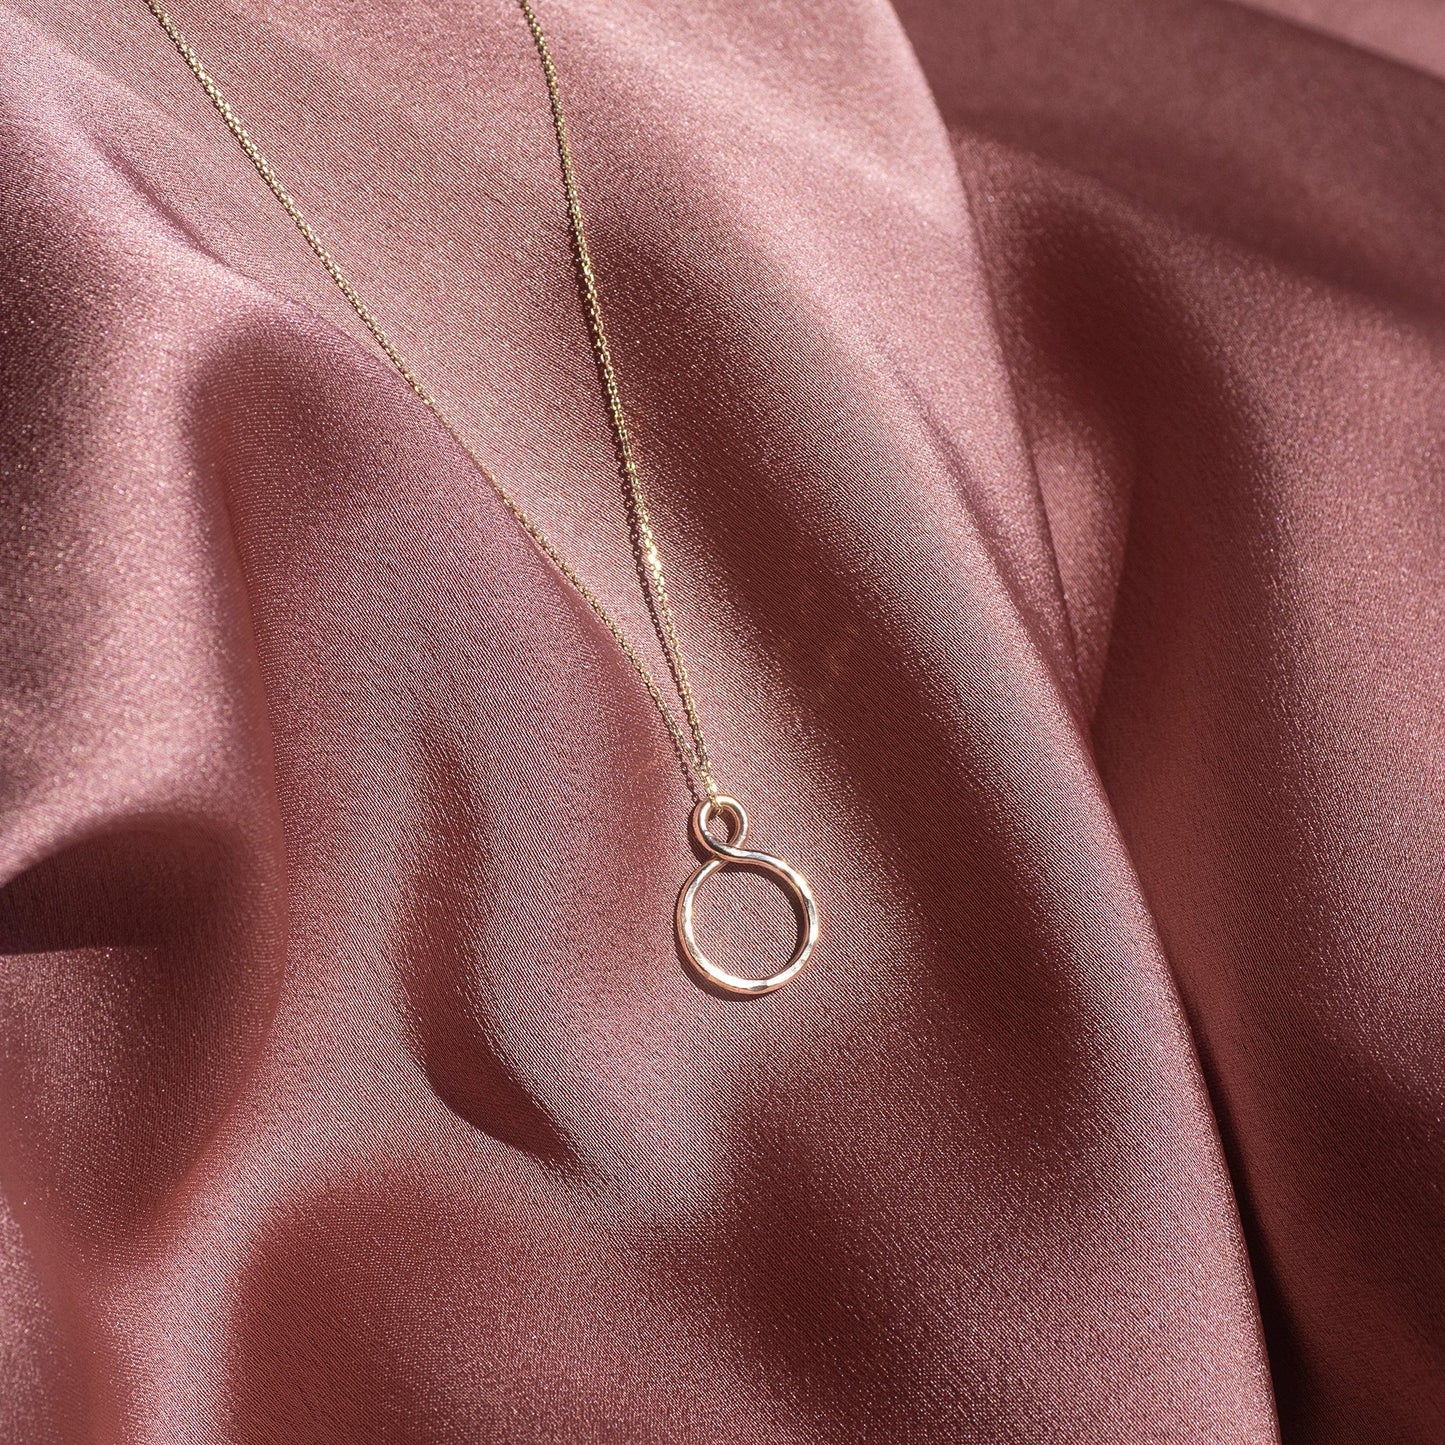 18th Birthday Gift - Petite Infinity Necklace - 9kt Gold